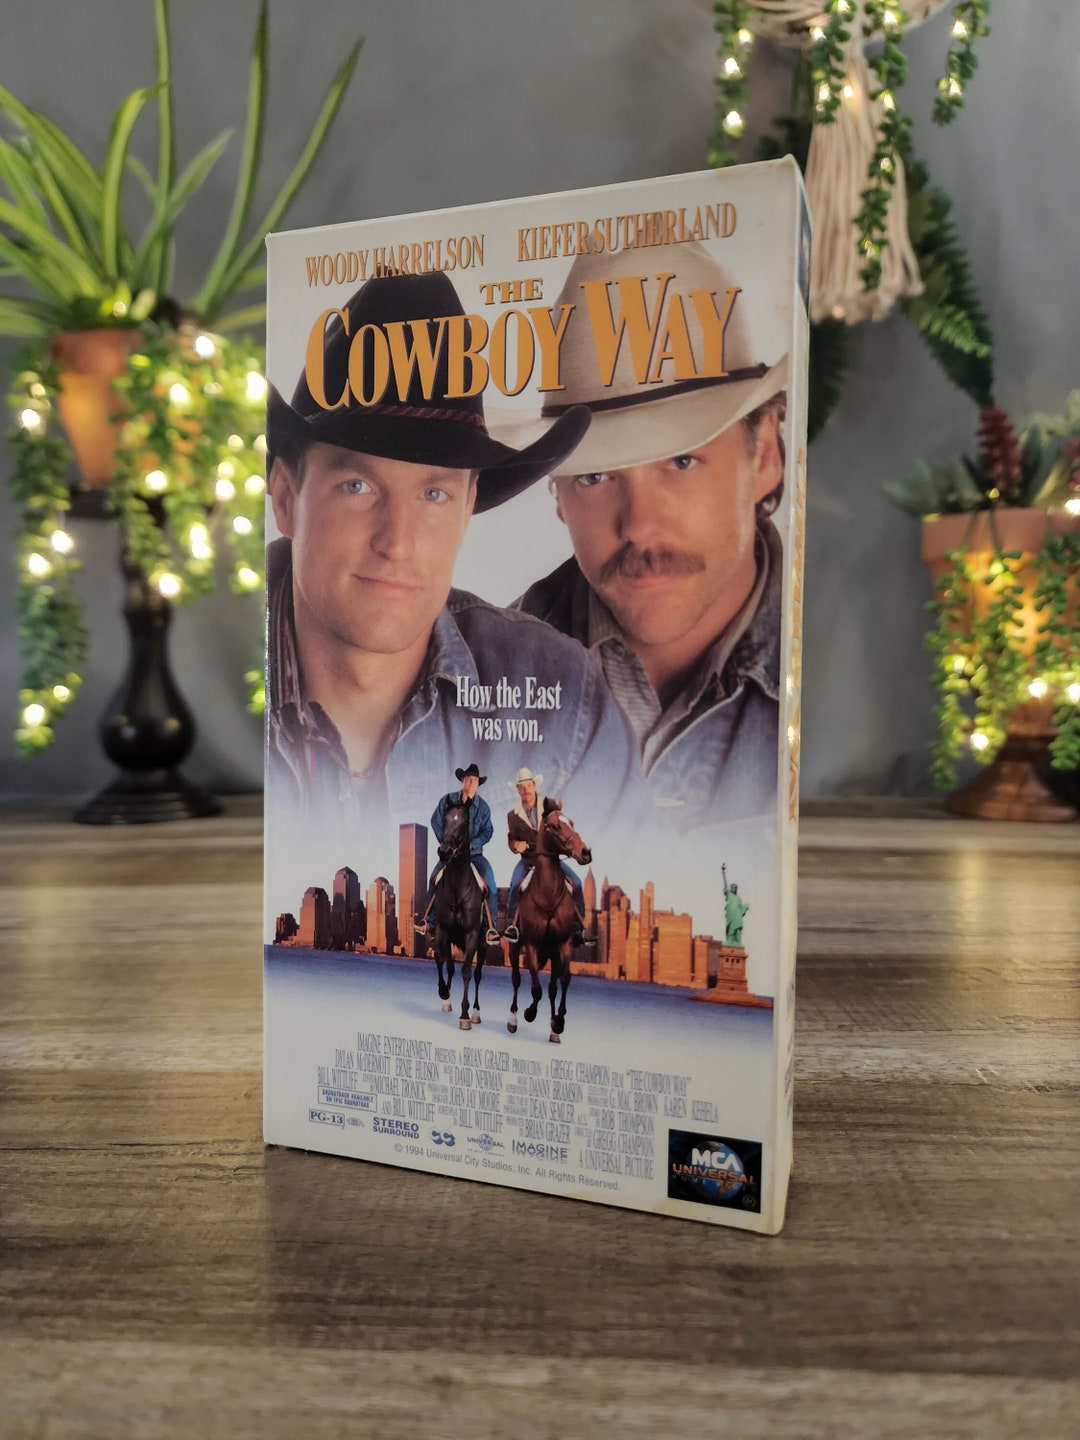 The Cowboy Way VHS Stars Woody Harrelson and Kiefer - Etsy